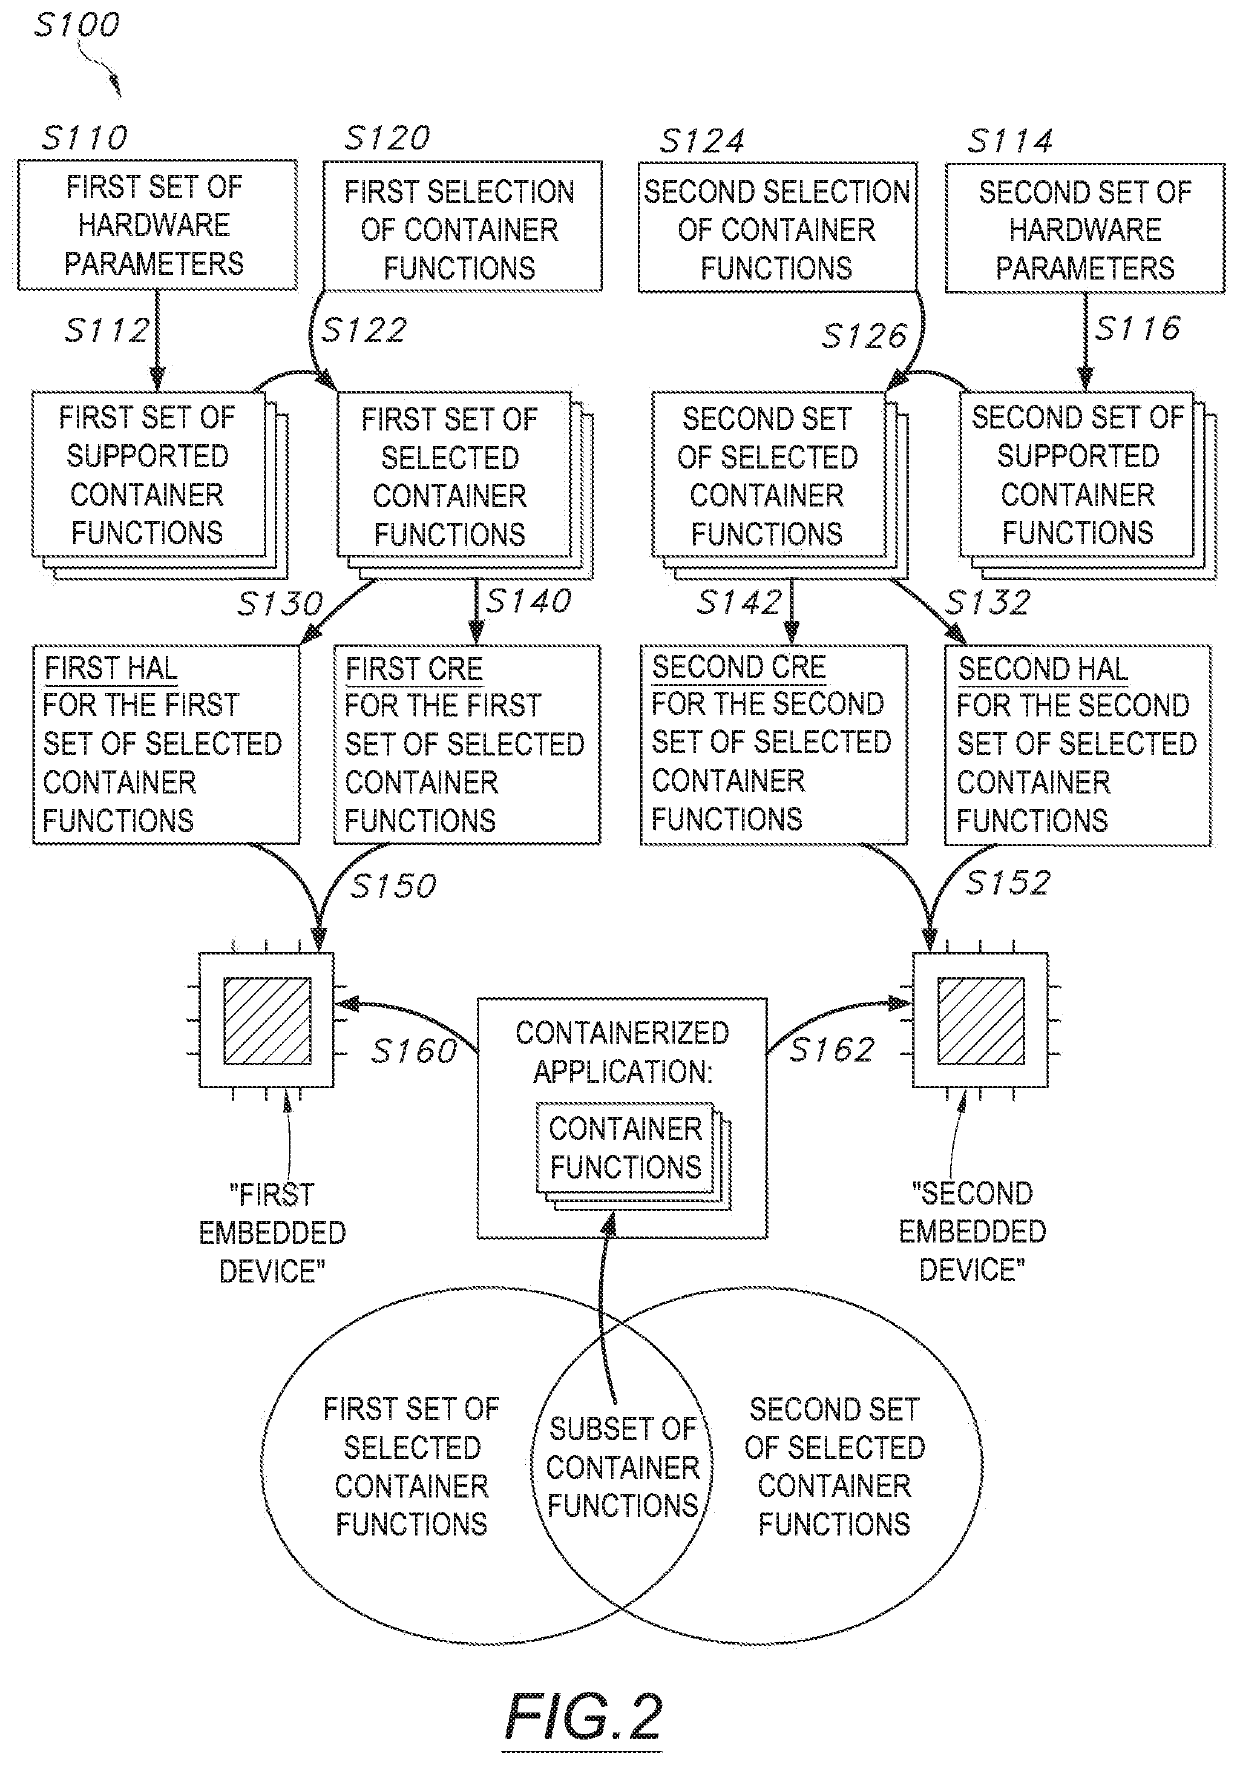 Method for deploying containerized security technologies on embedded devices